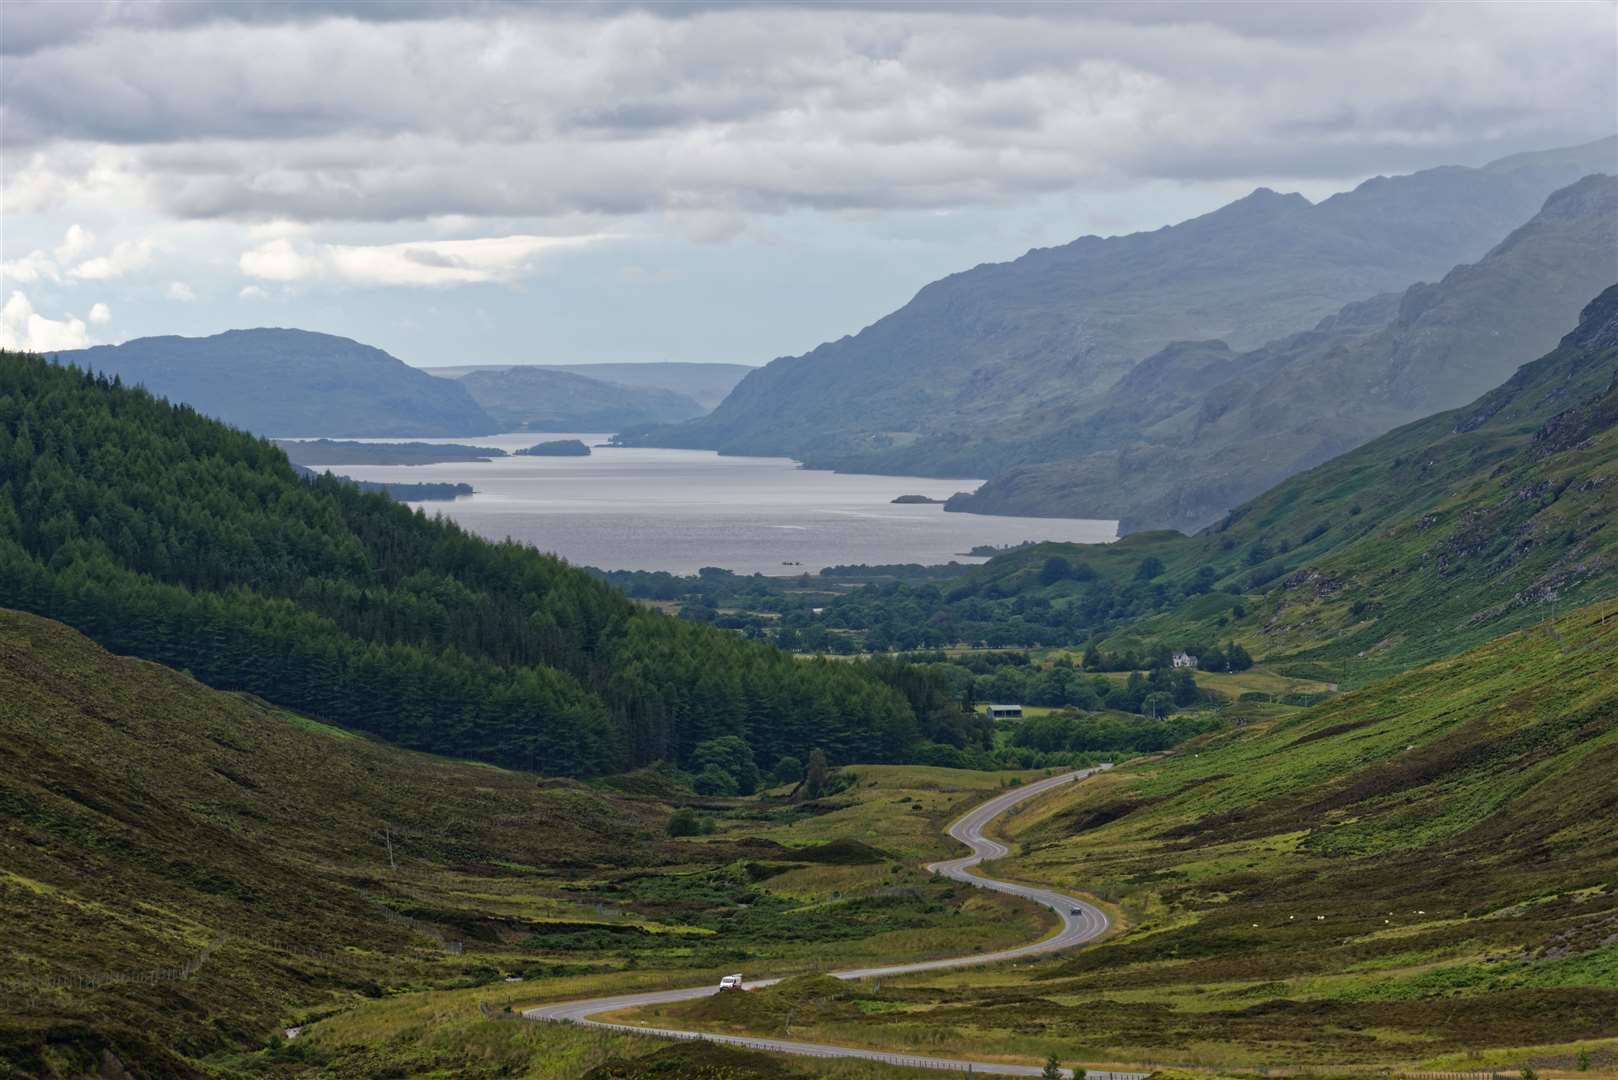 The collision happened on the A832 near Loch Maree between Kinlochewe and Kerrysdale.